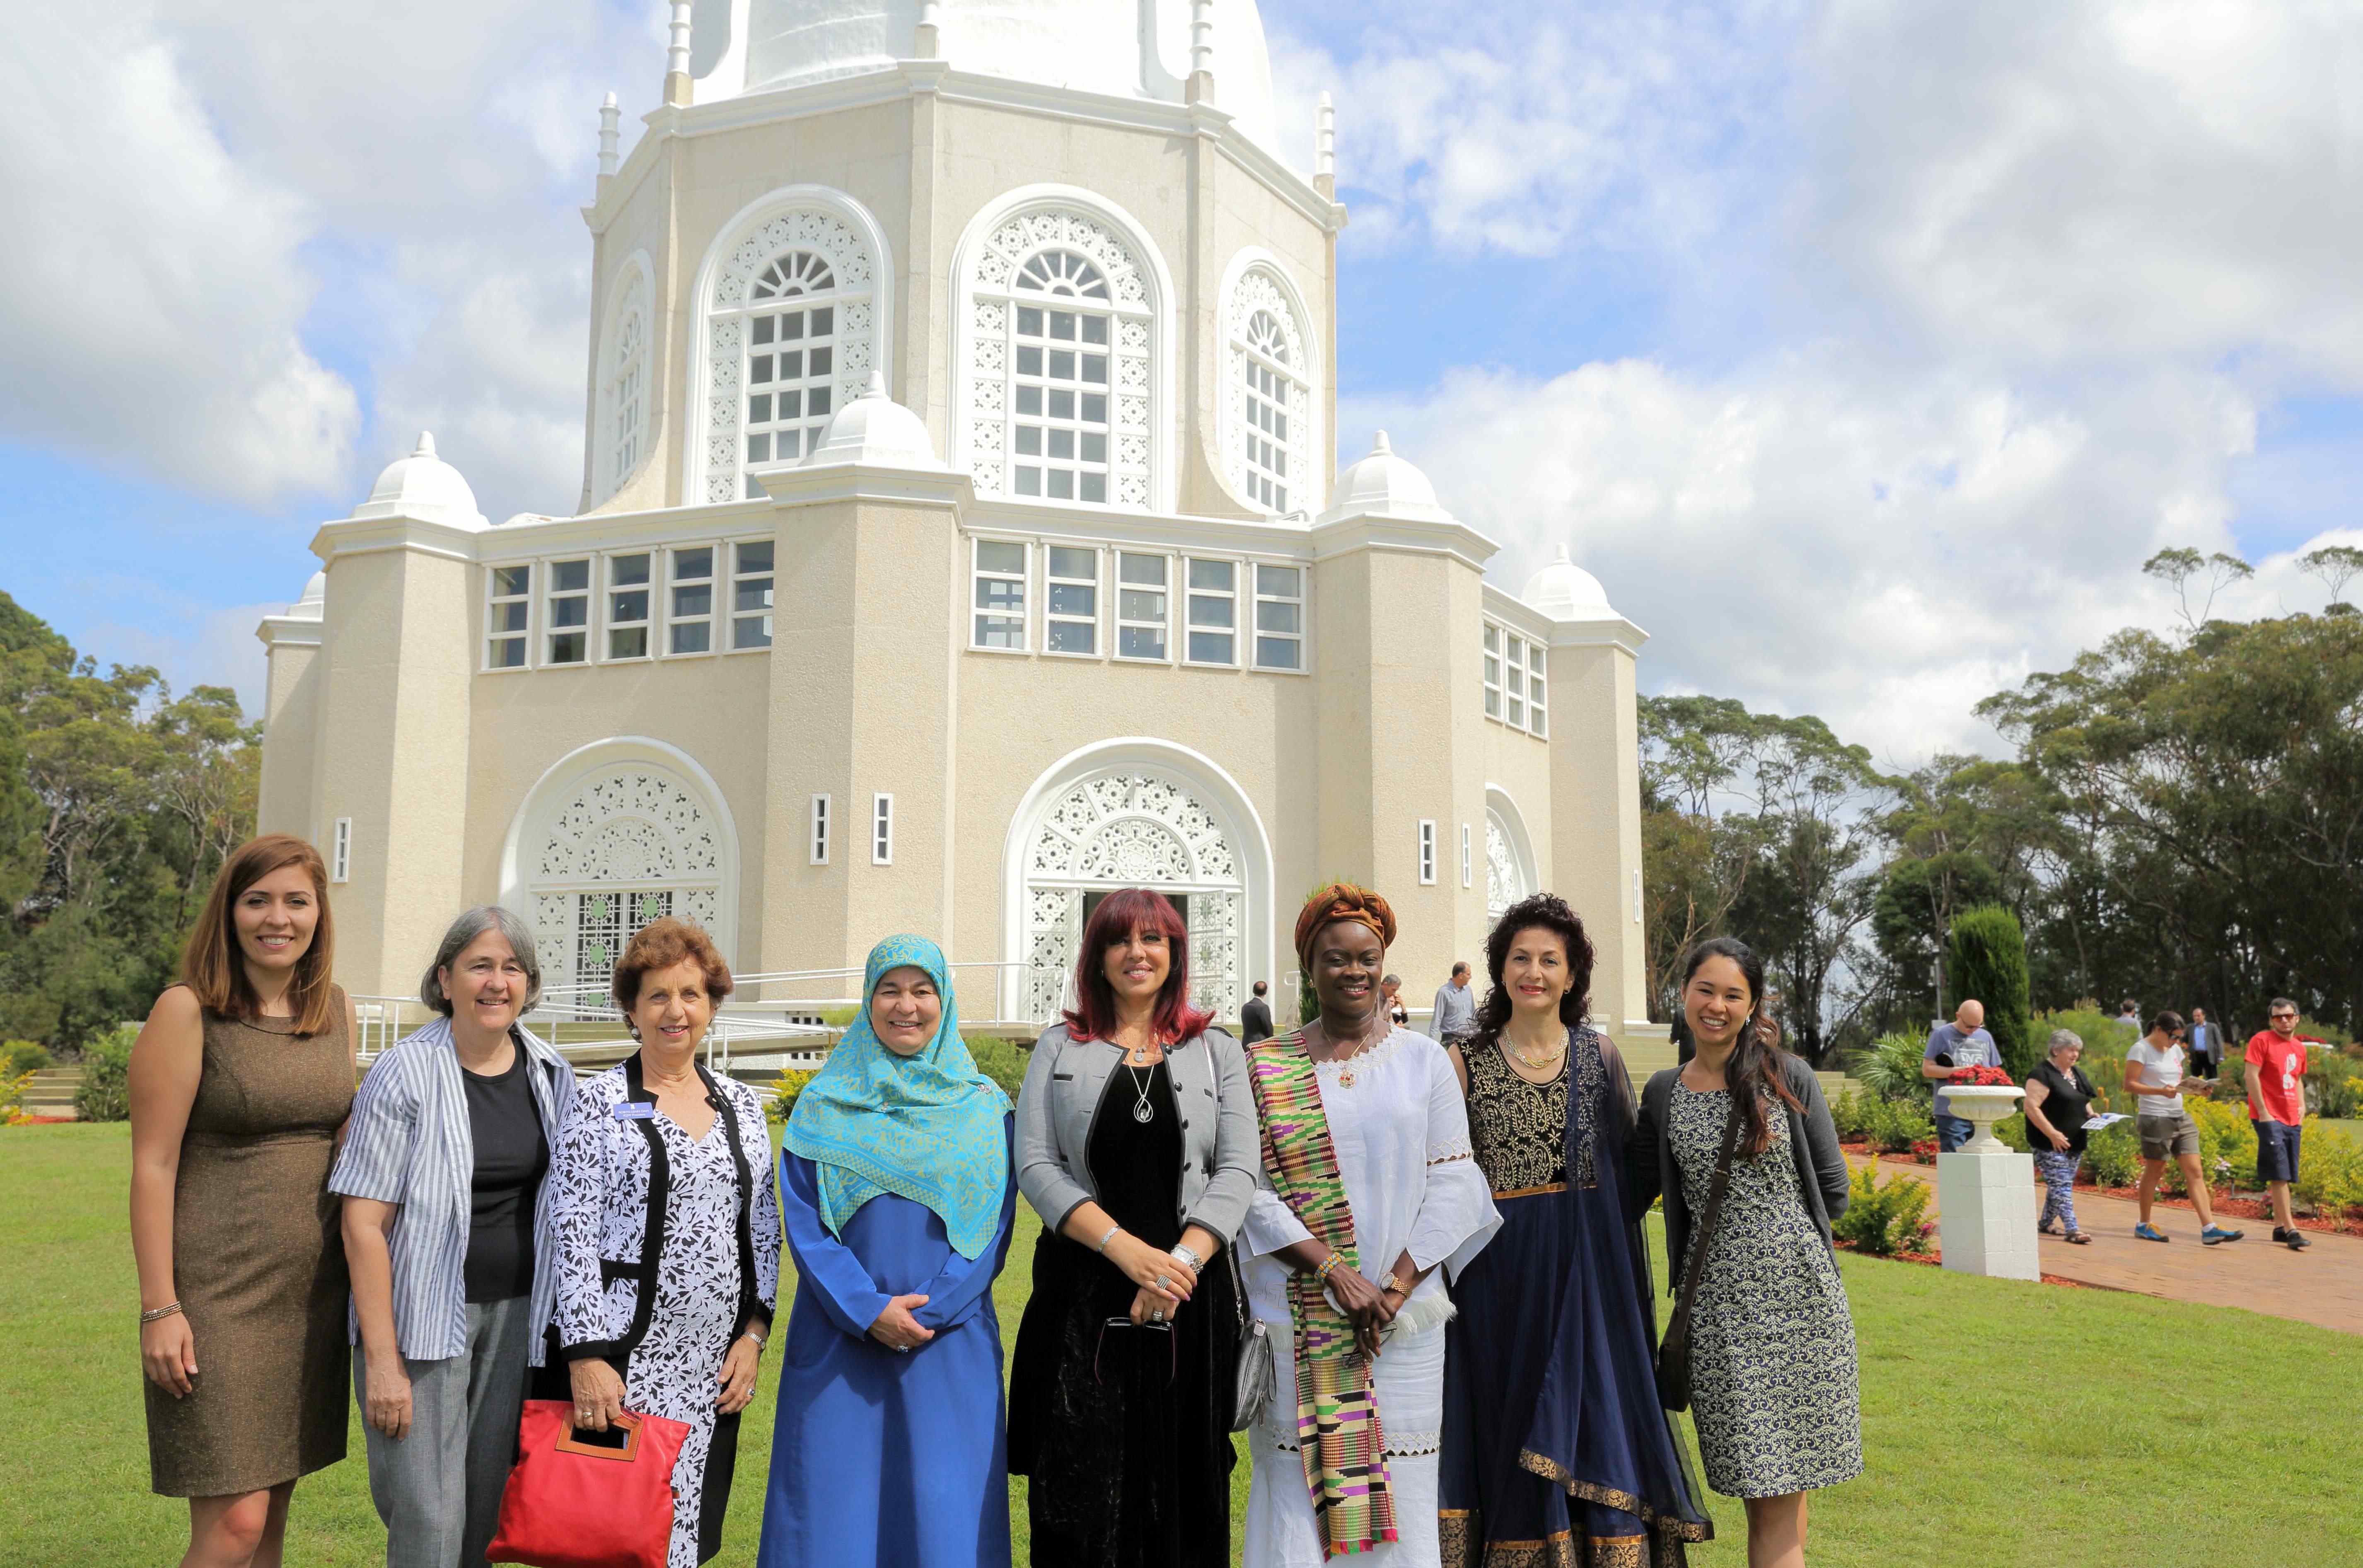 Speakers focus on how religion can advance gender equality